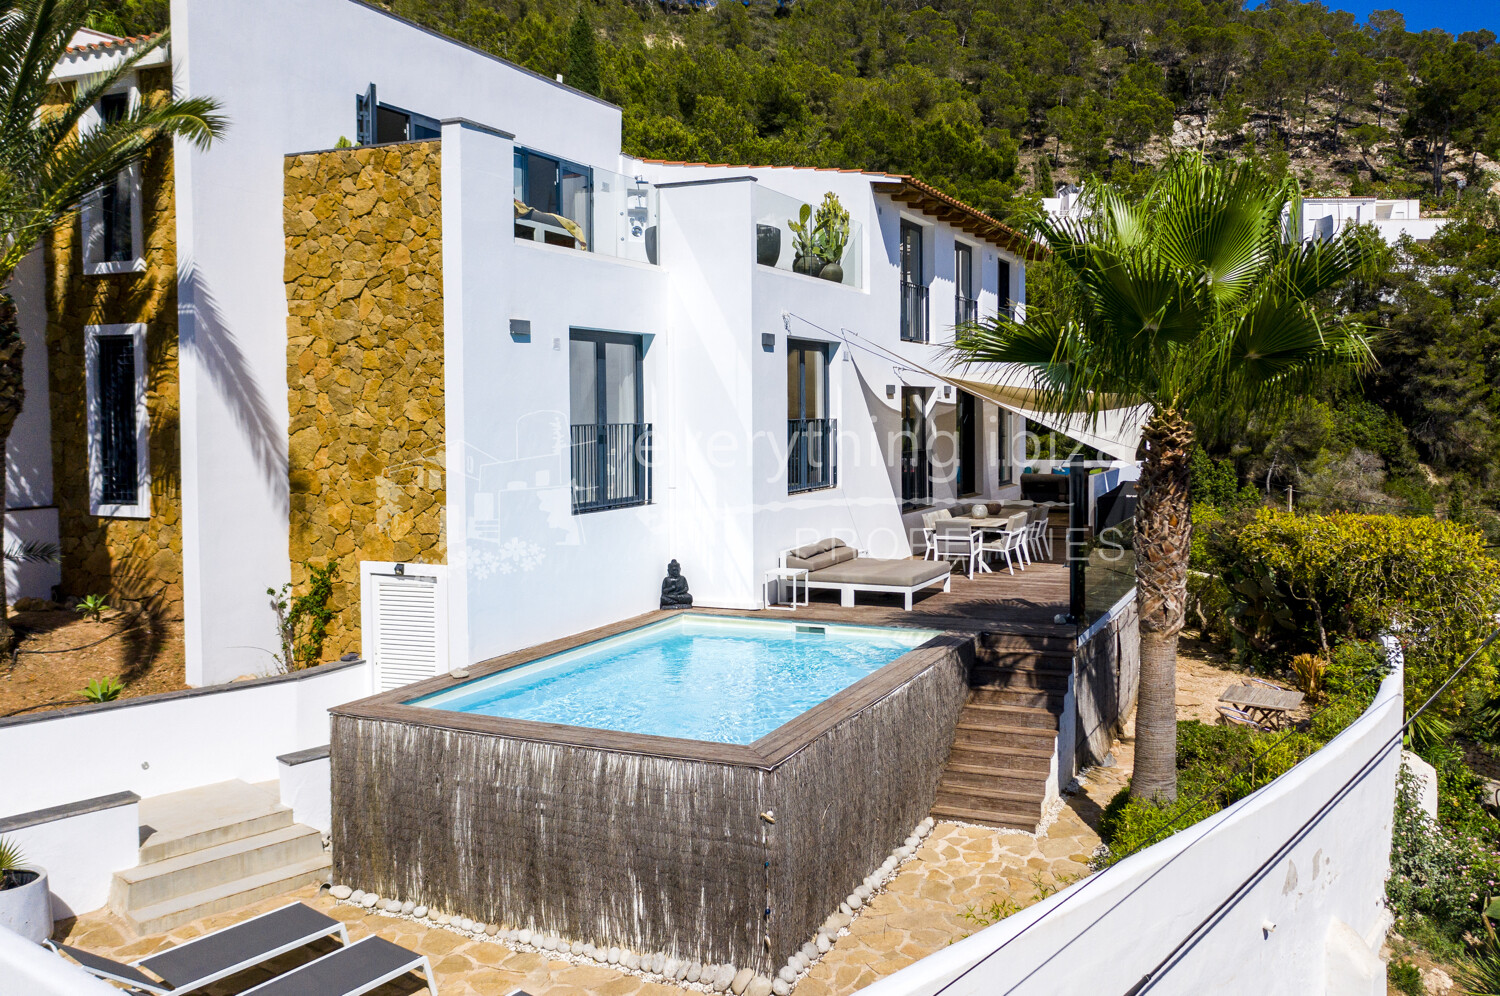 Seven Bedroom Villa with Tourist License and Elevated Sea Views, ref. 1656, for sale in Ibiza by everything ibiza Properties